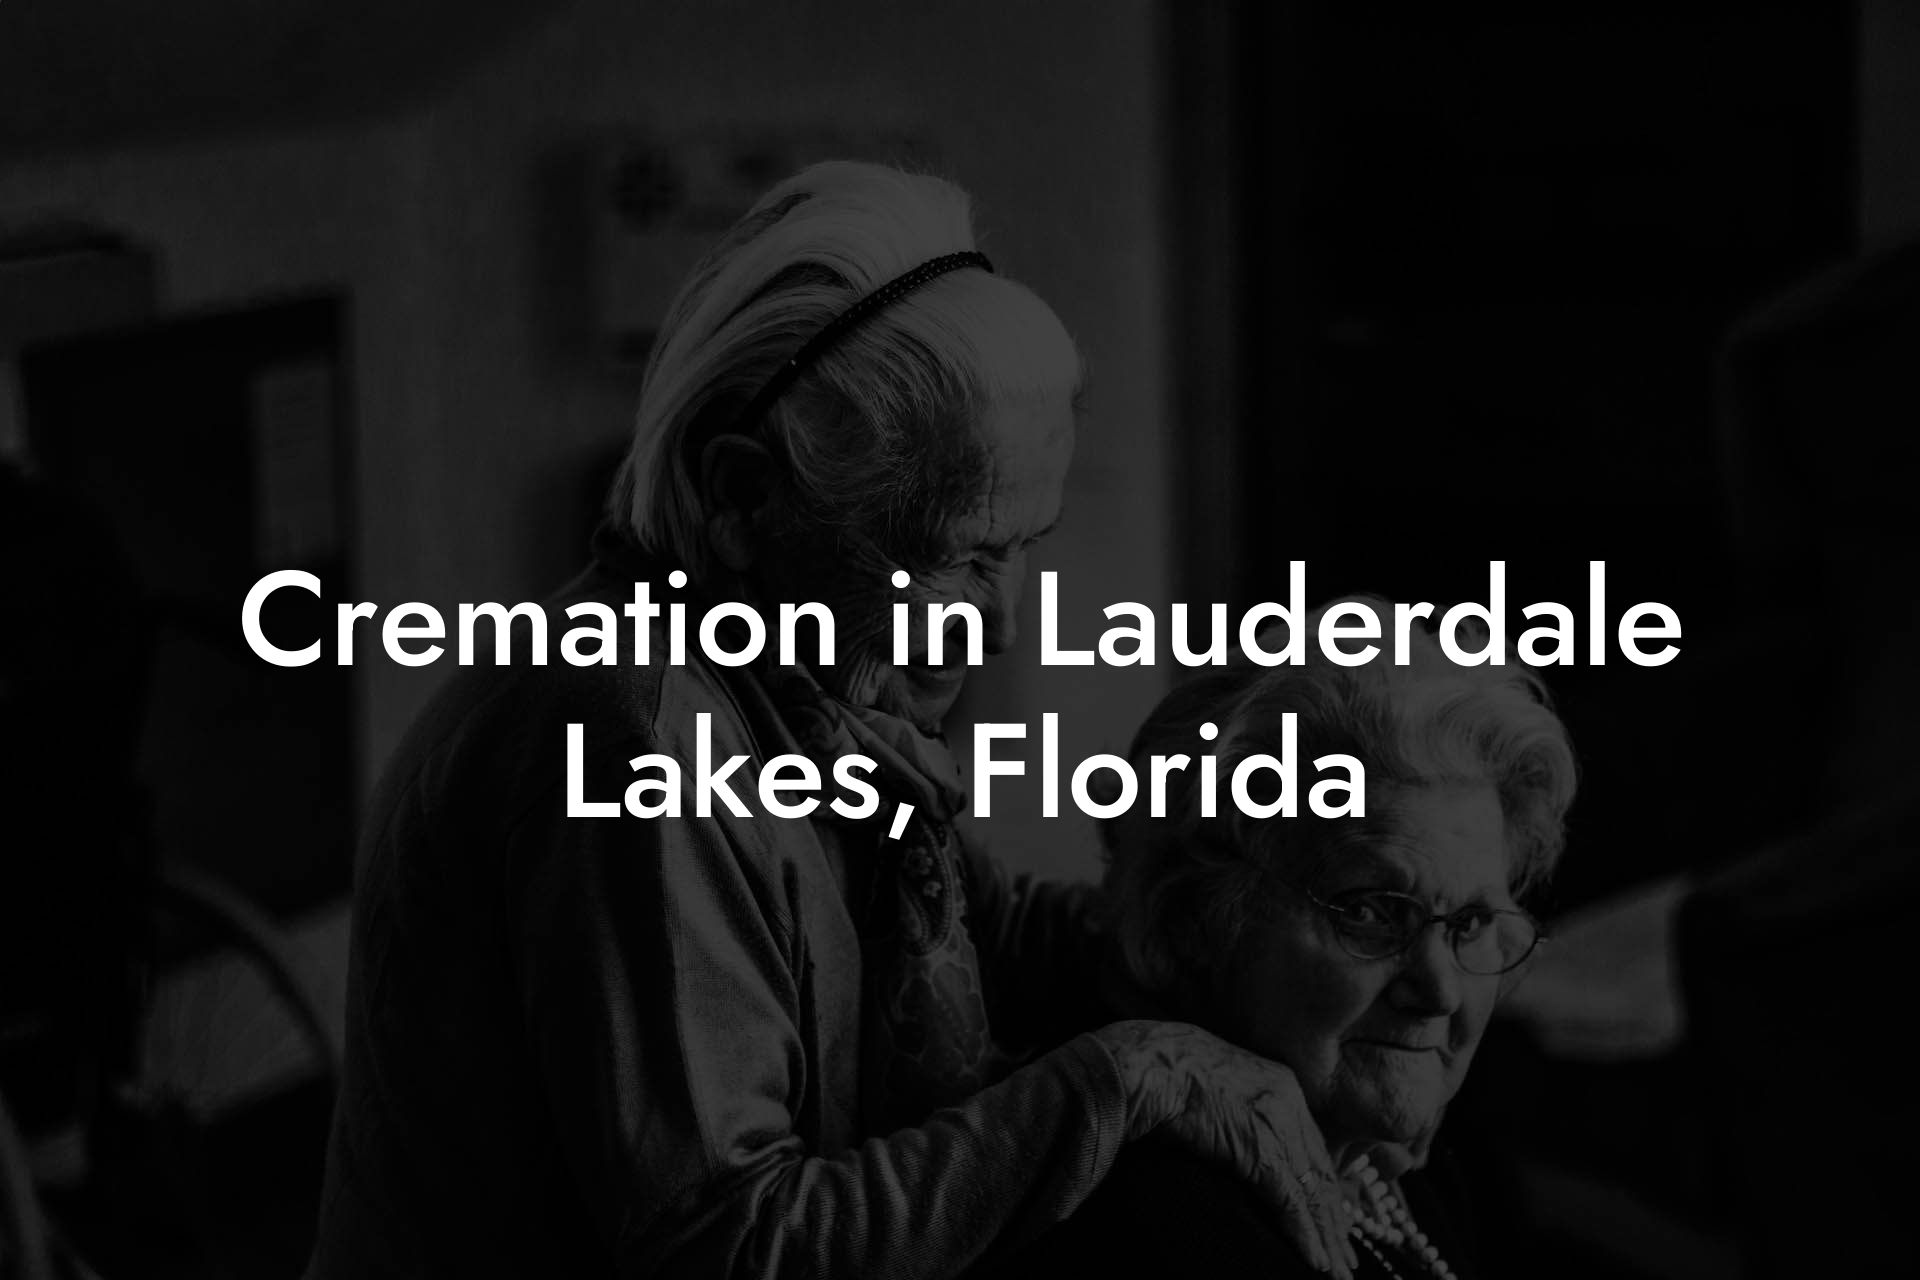 Cremation in Lauderdale Lakes, Florida